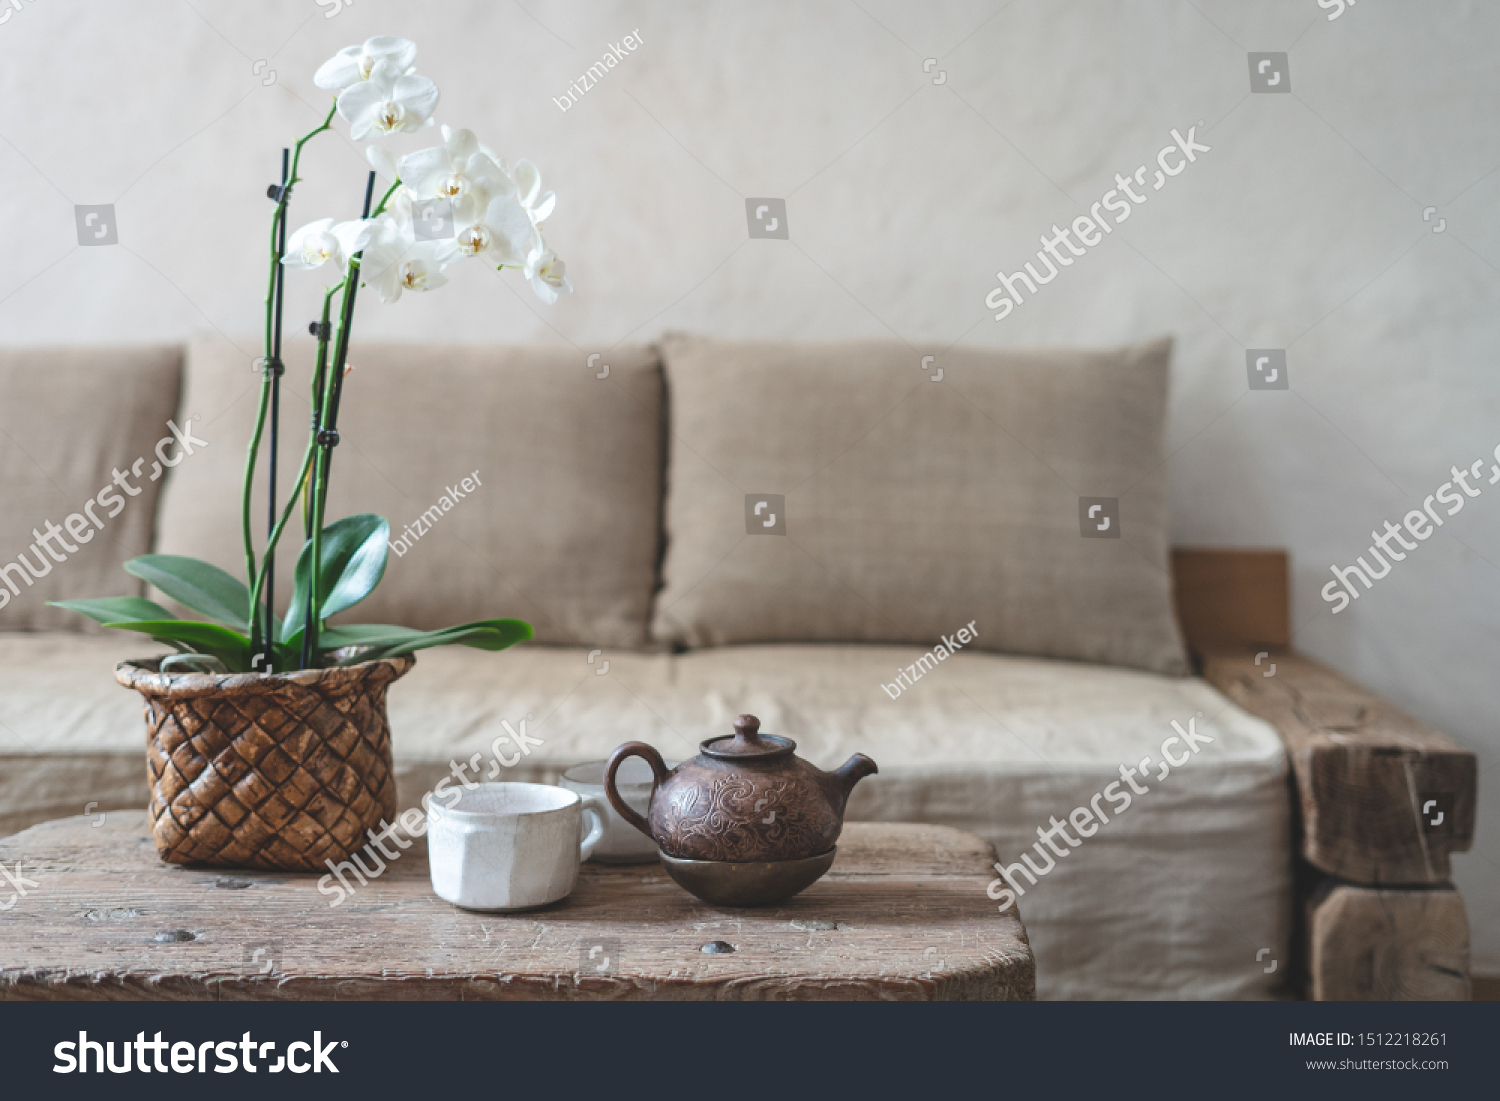 Selective focus of clay teapot, white cup and orchid flower at wooden table against blurred wall with copy space on background. Cozy house with comfort sofa in vintage interior style #1512218261